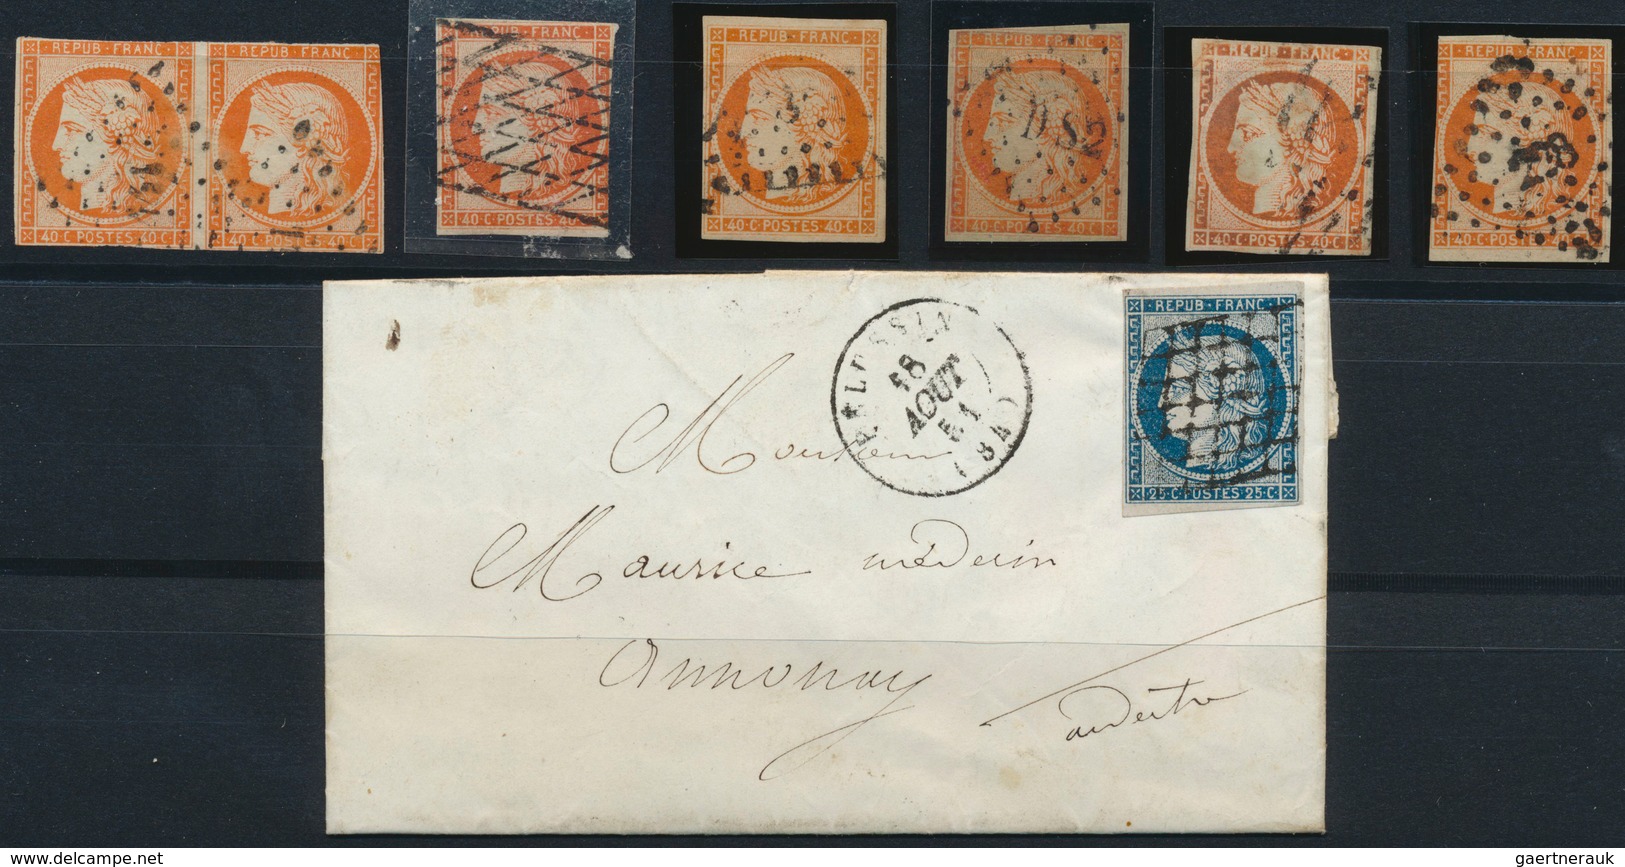 29682 Frankreich: 1849/1850, CERES 1st Issue, Lot Of 34 Stamps Incl One Cover, Varied Condition, Incl. 10c - Gebruikt